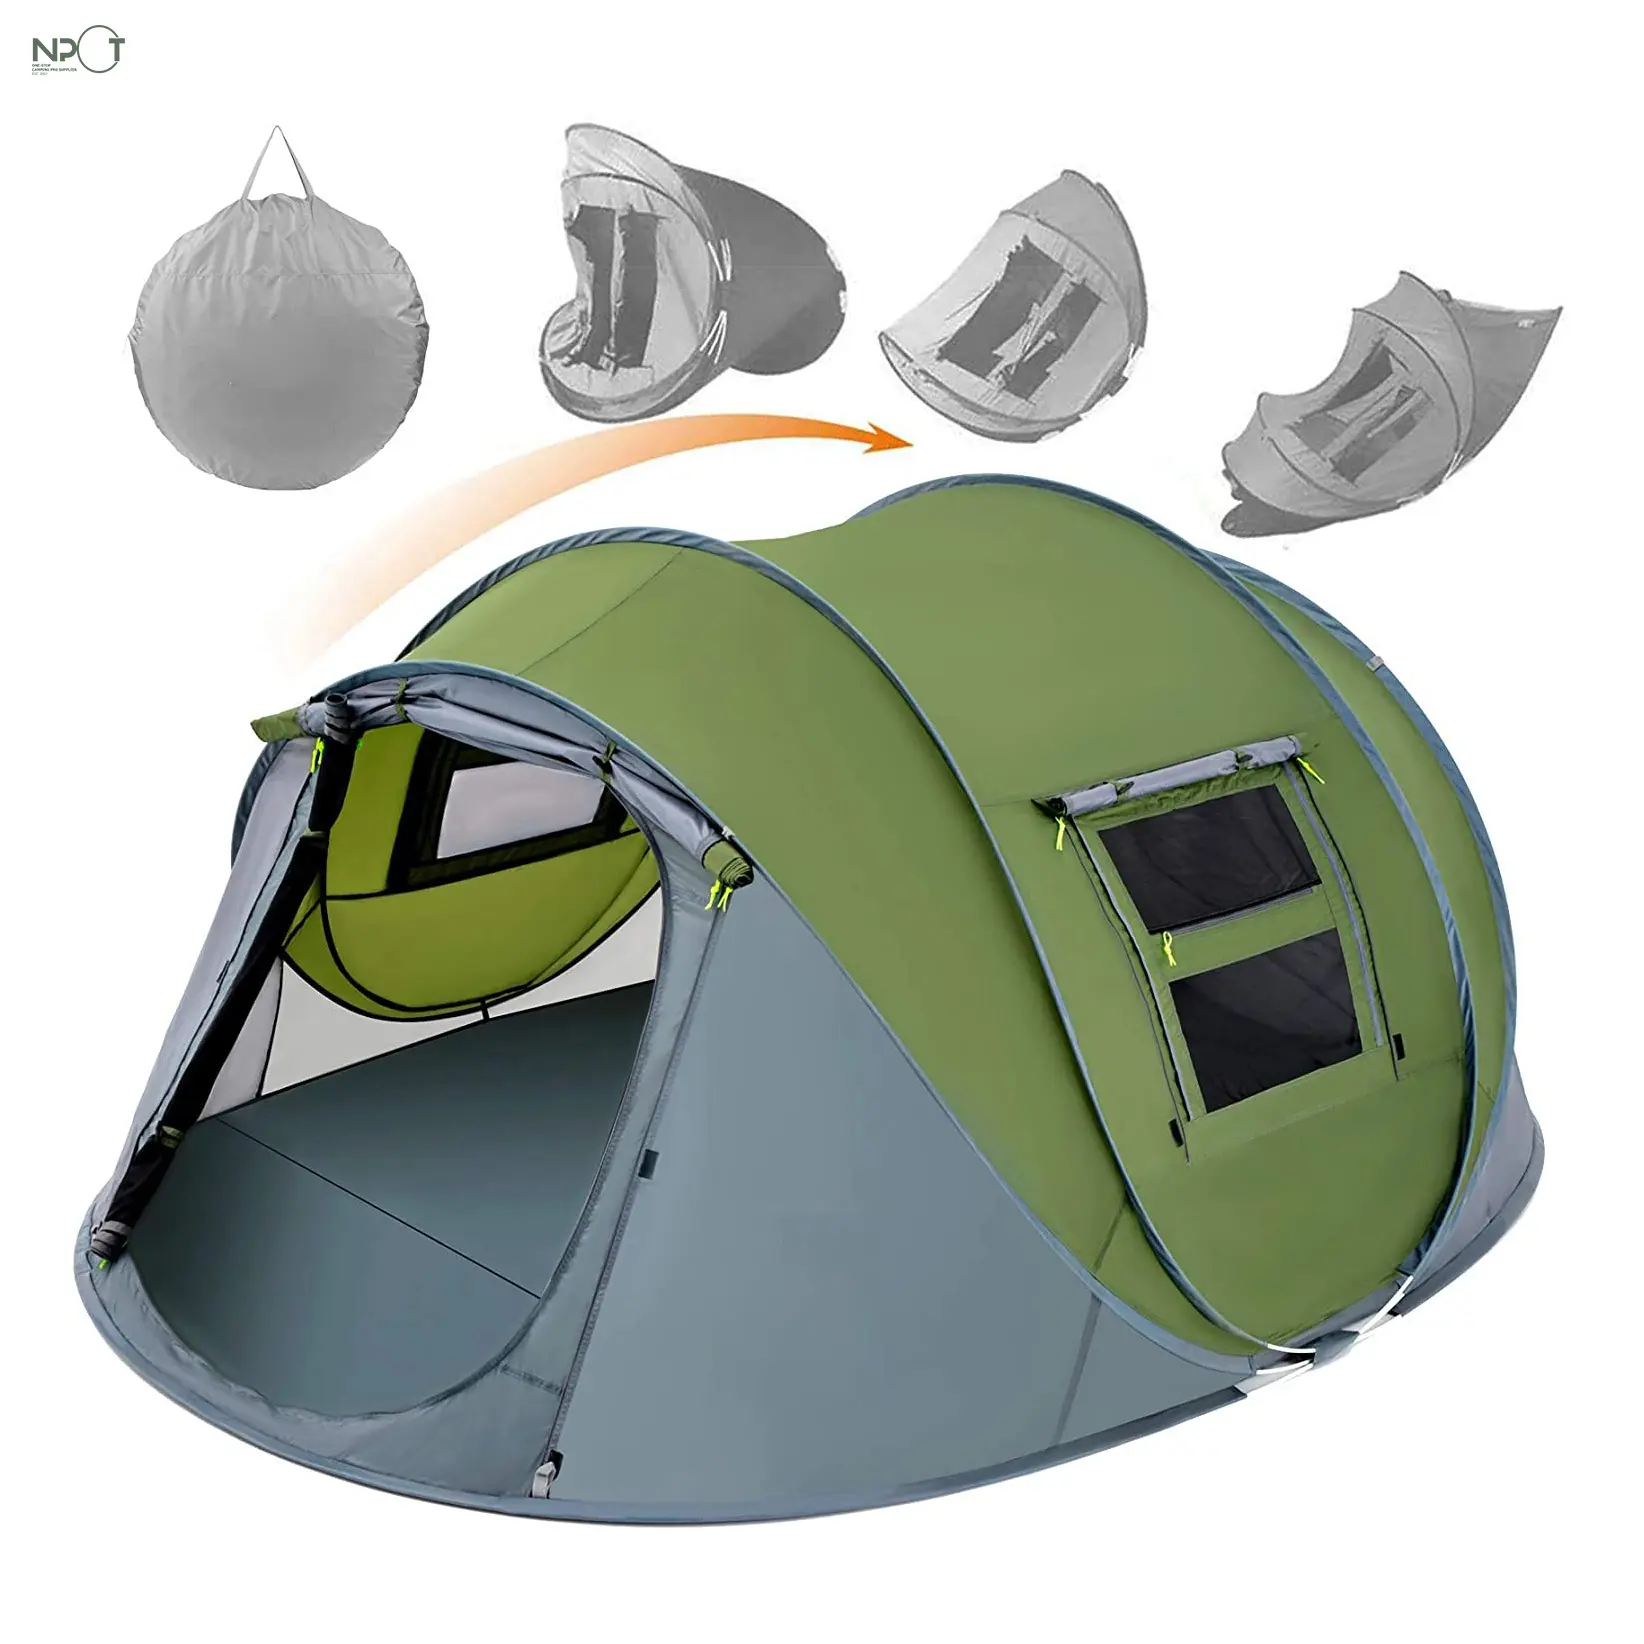 NPOT 4 Person Easy Pop Up Tent Waterproof Automatic Setup 2 Doors-Instant Family Tents for Camping Hiking   Traveling